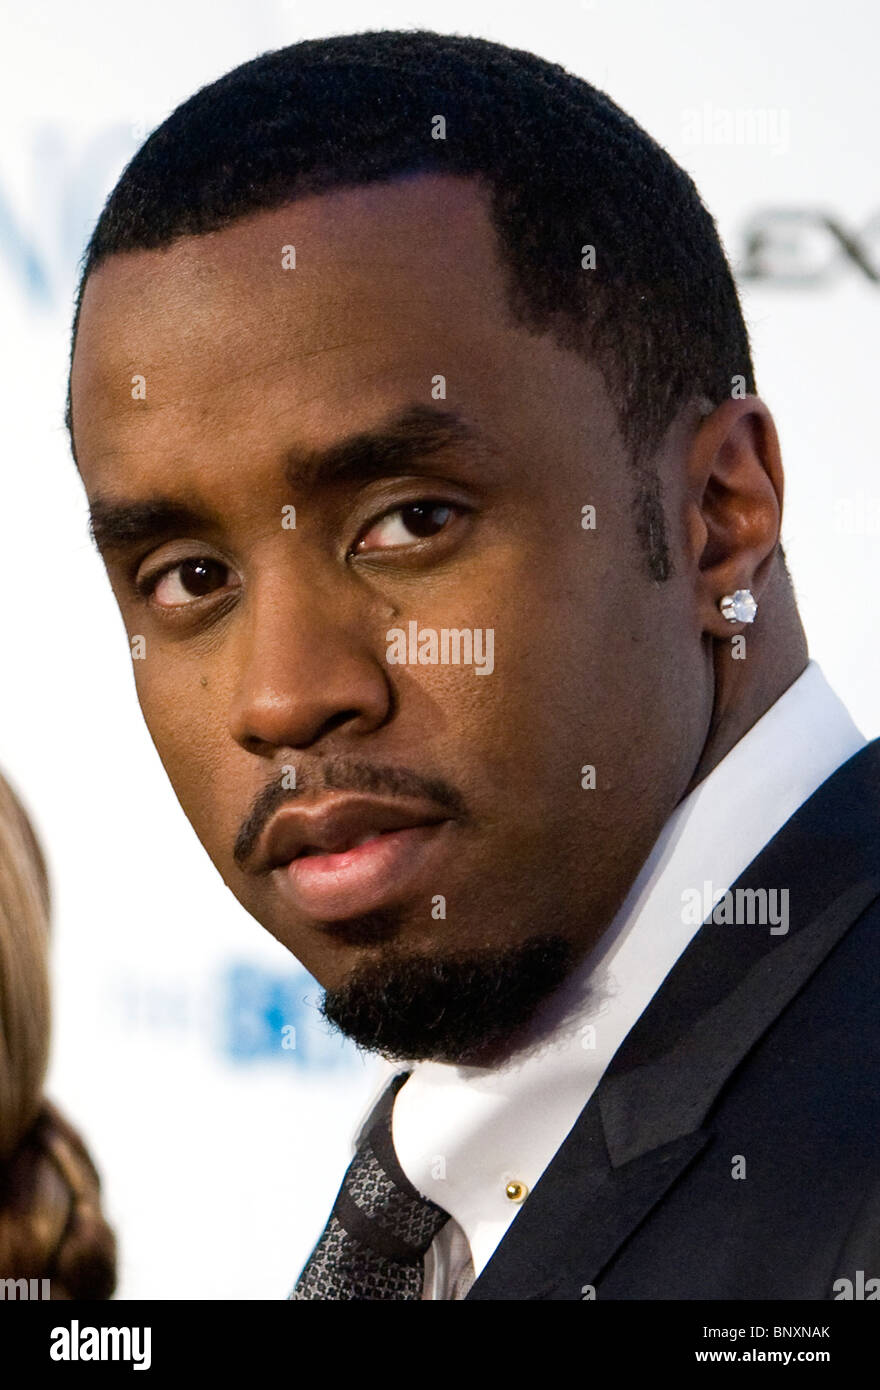 Sean "Diddy" Combs. Stockfoto